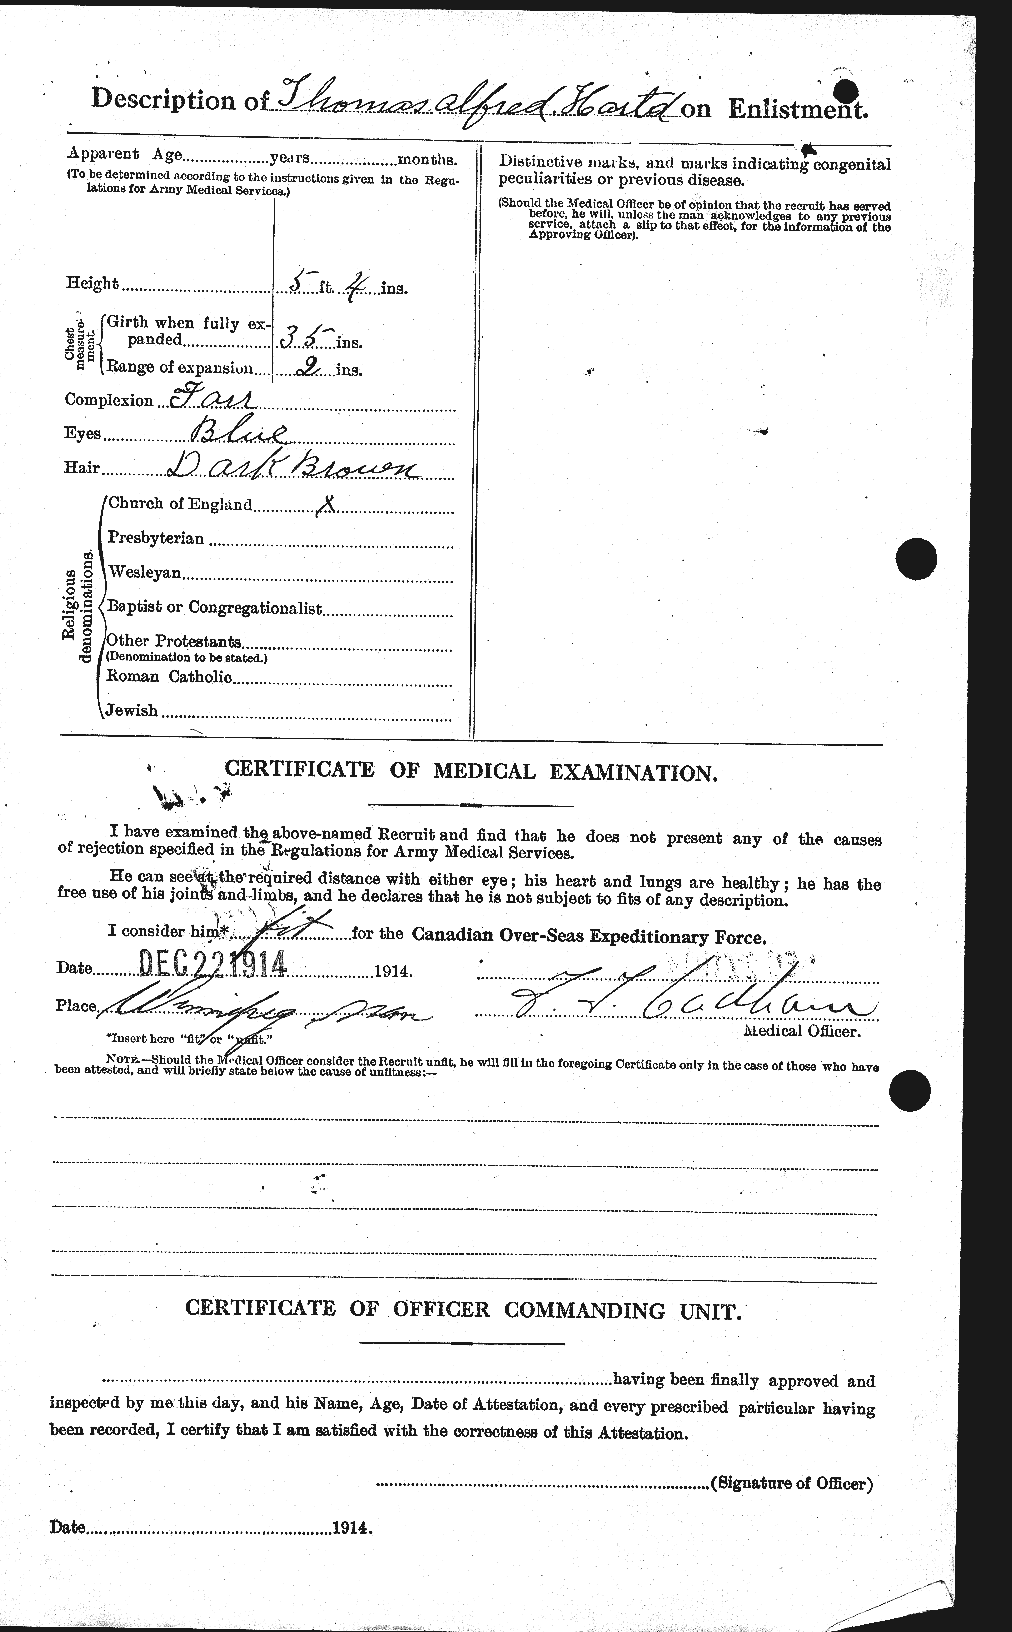 Personnel Records of the First World War - CEF 387003b